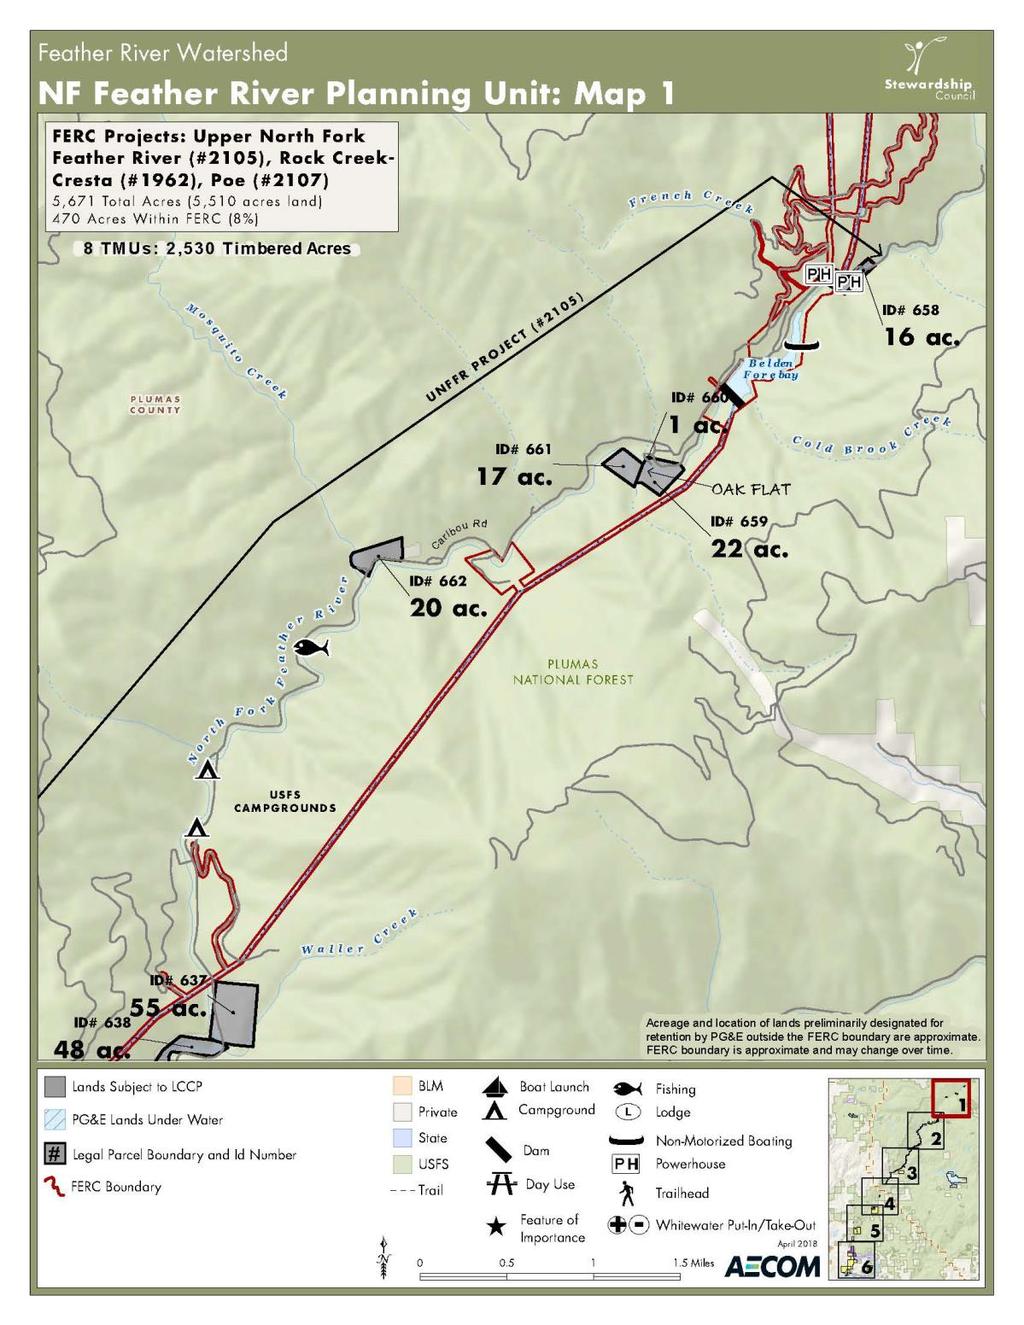 North Fork Feather River Planning Unit LCCP May 1, 2019 Exhibit 1.